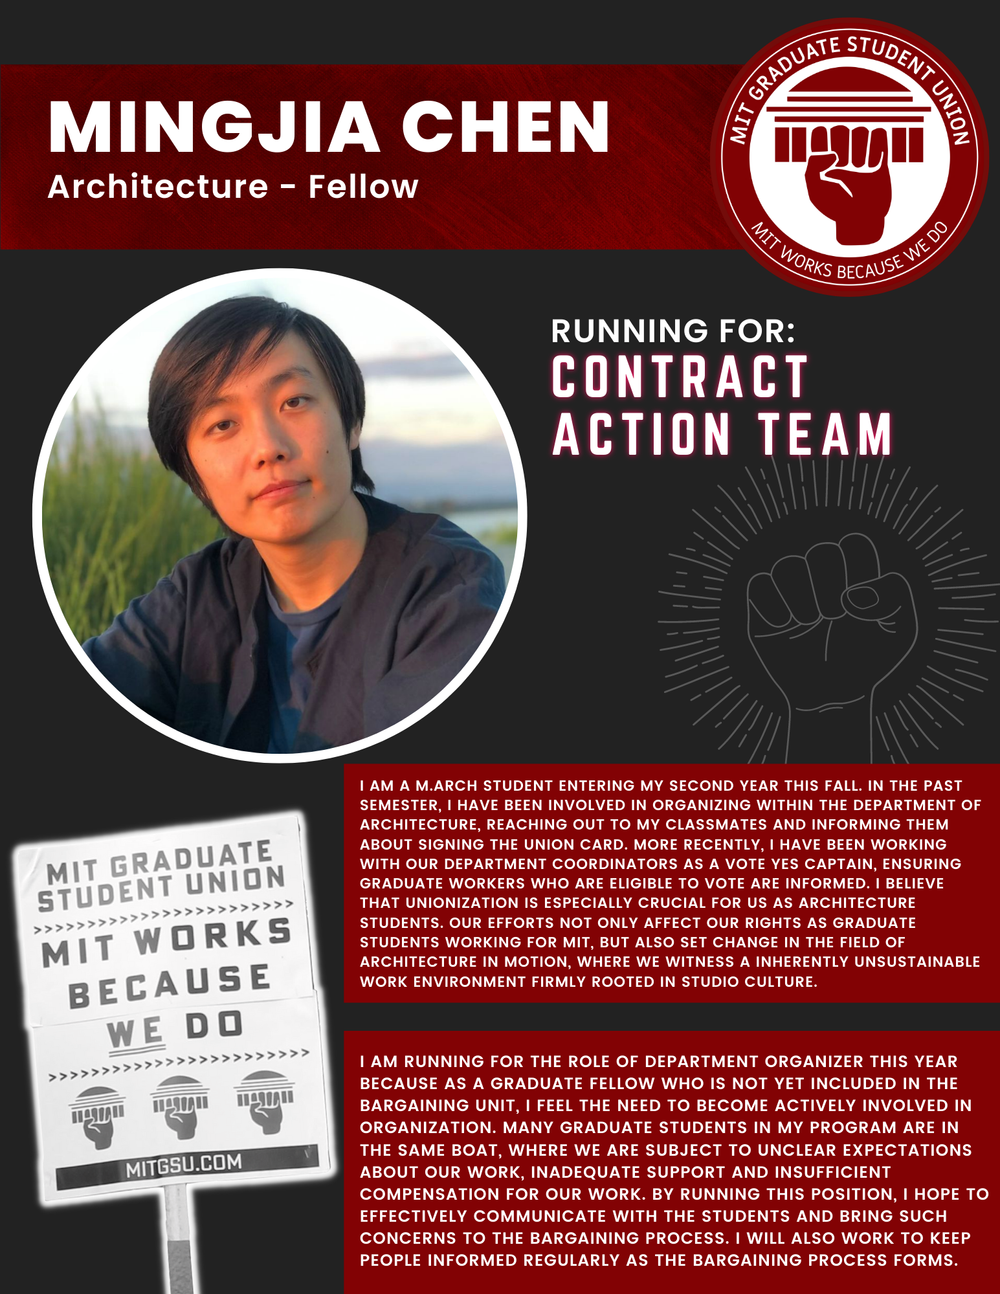  MINGJIA CHEN  Architecture - Fellow   RUNNING FOR: Contract Action Team  I AM A M.ARCH STUDENT ENTERING MY SECOND YEAR THIS FALL. IN THE PAST SEMESTER, I HAVE BEEN INVOLVED IN ORGANIZING WITHIN THE DEPARTMENT OF ARCHITECTURE, REACHING OUT TO MY CLAS